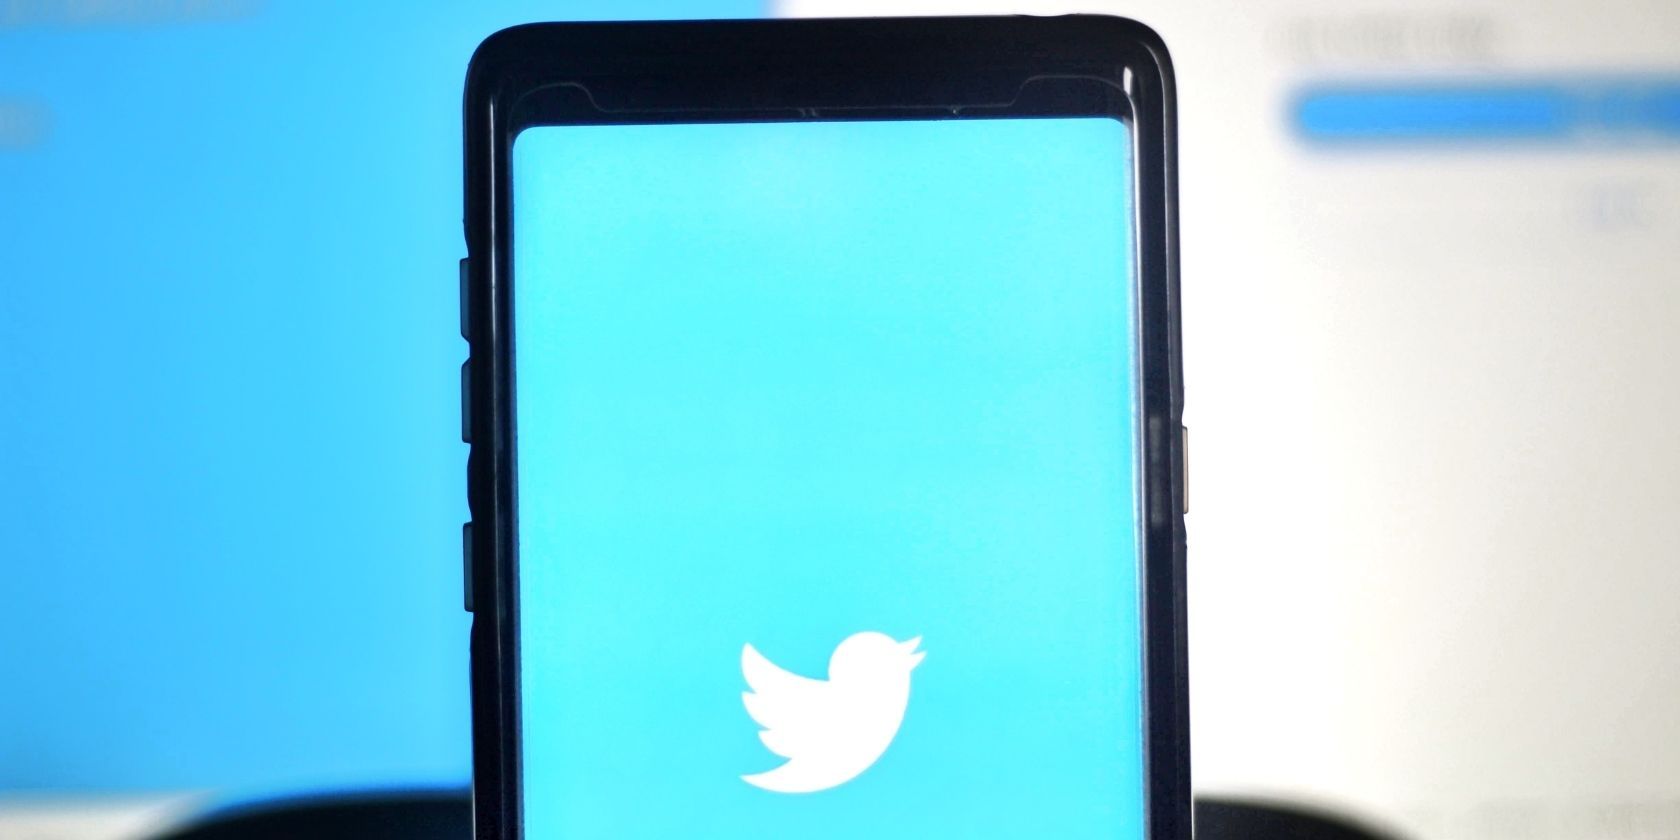 Twitter app opened on a smartphone